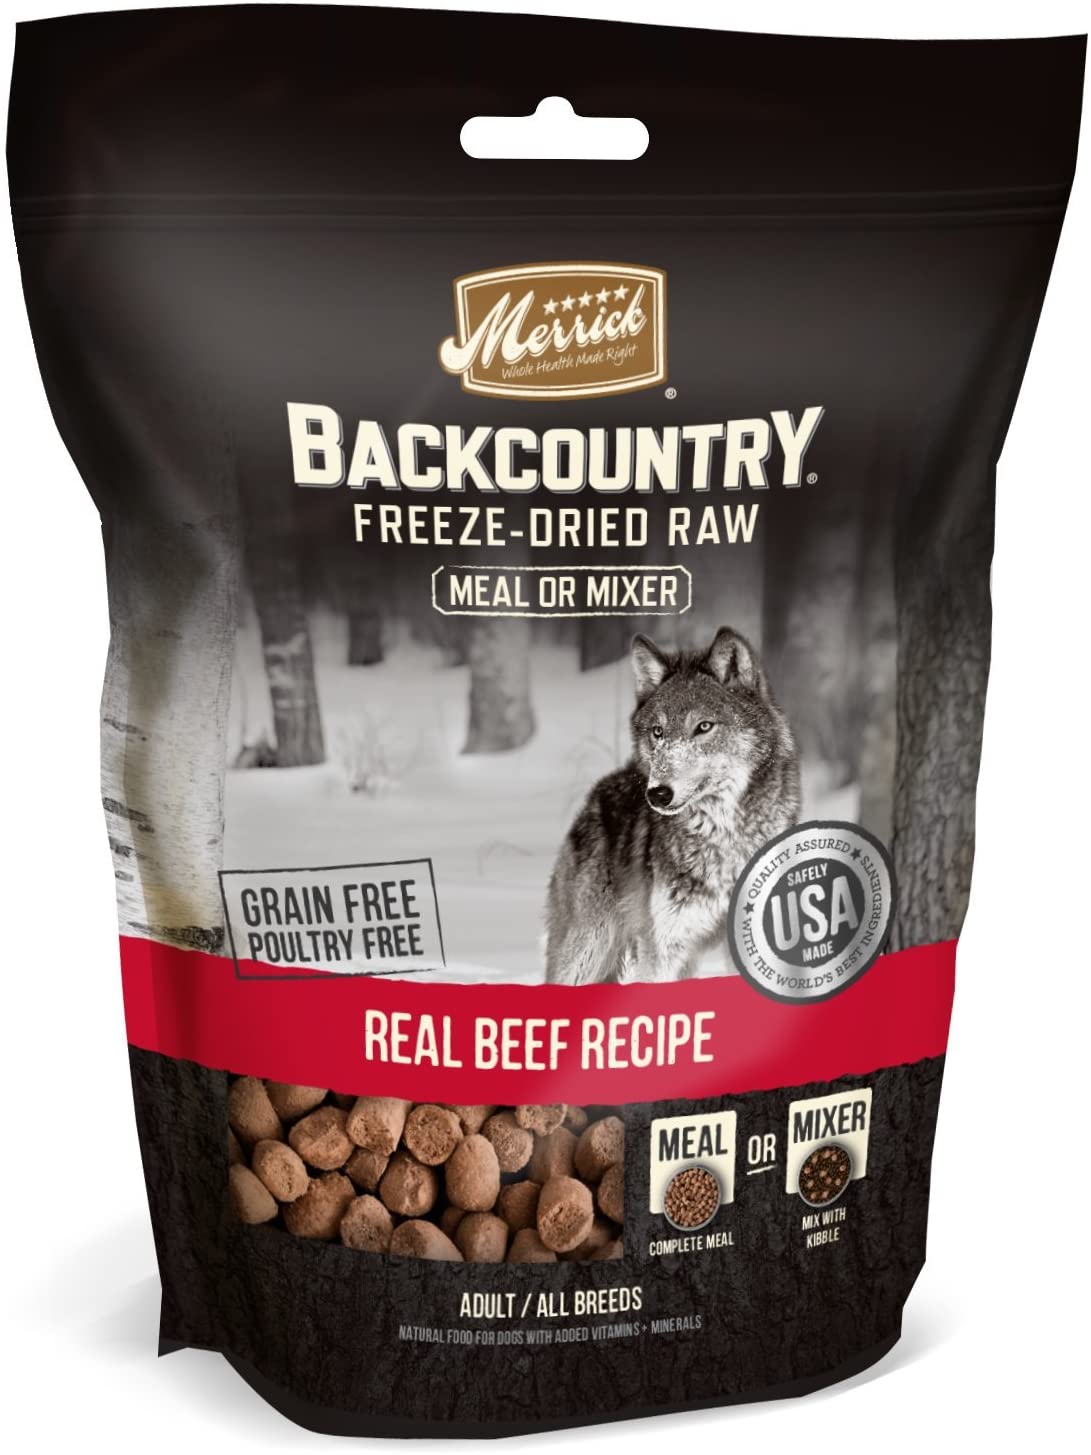 Merrick Backcountry Dried Raw Meal Mixer, Beef